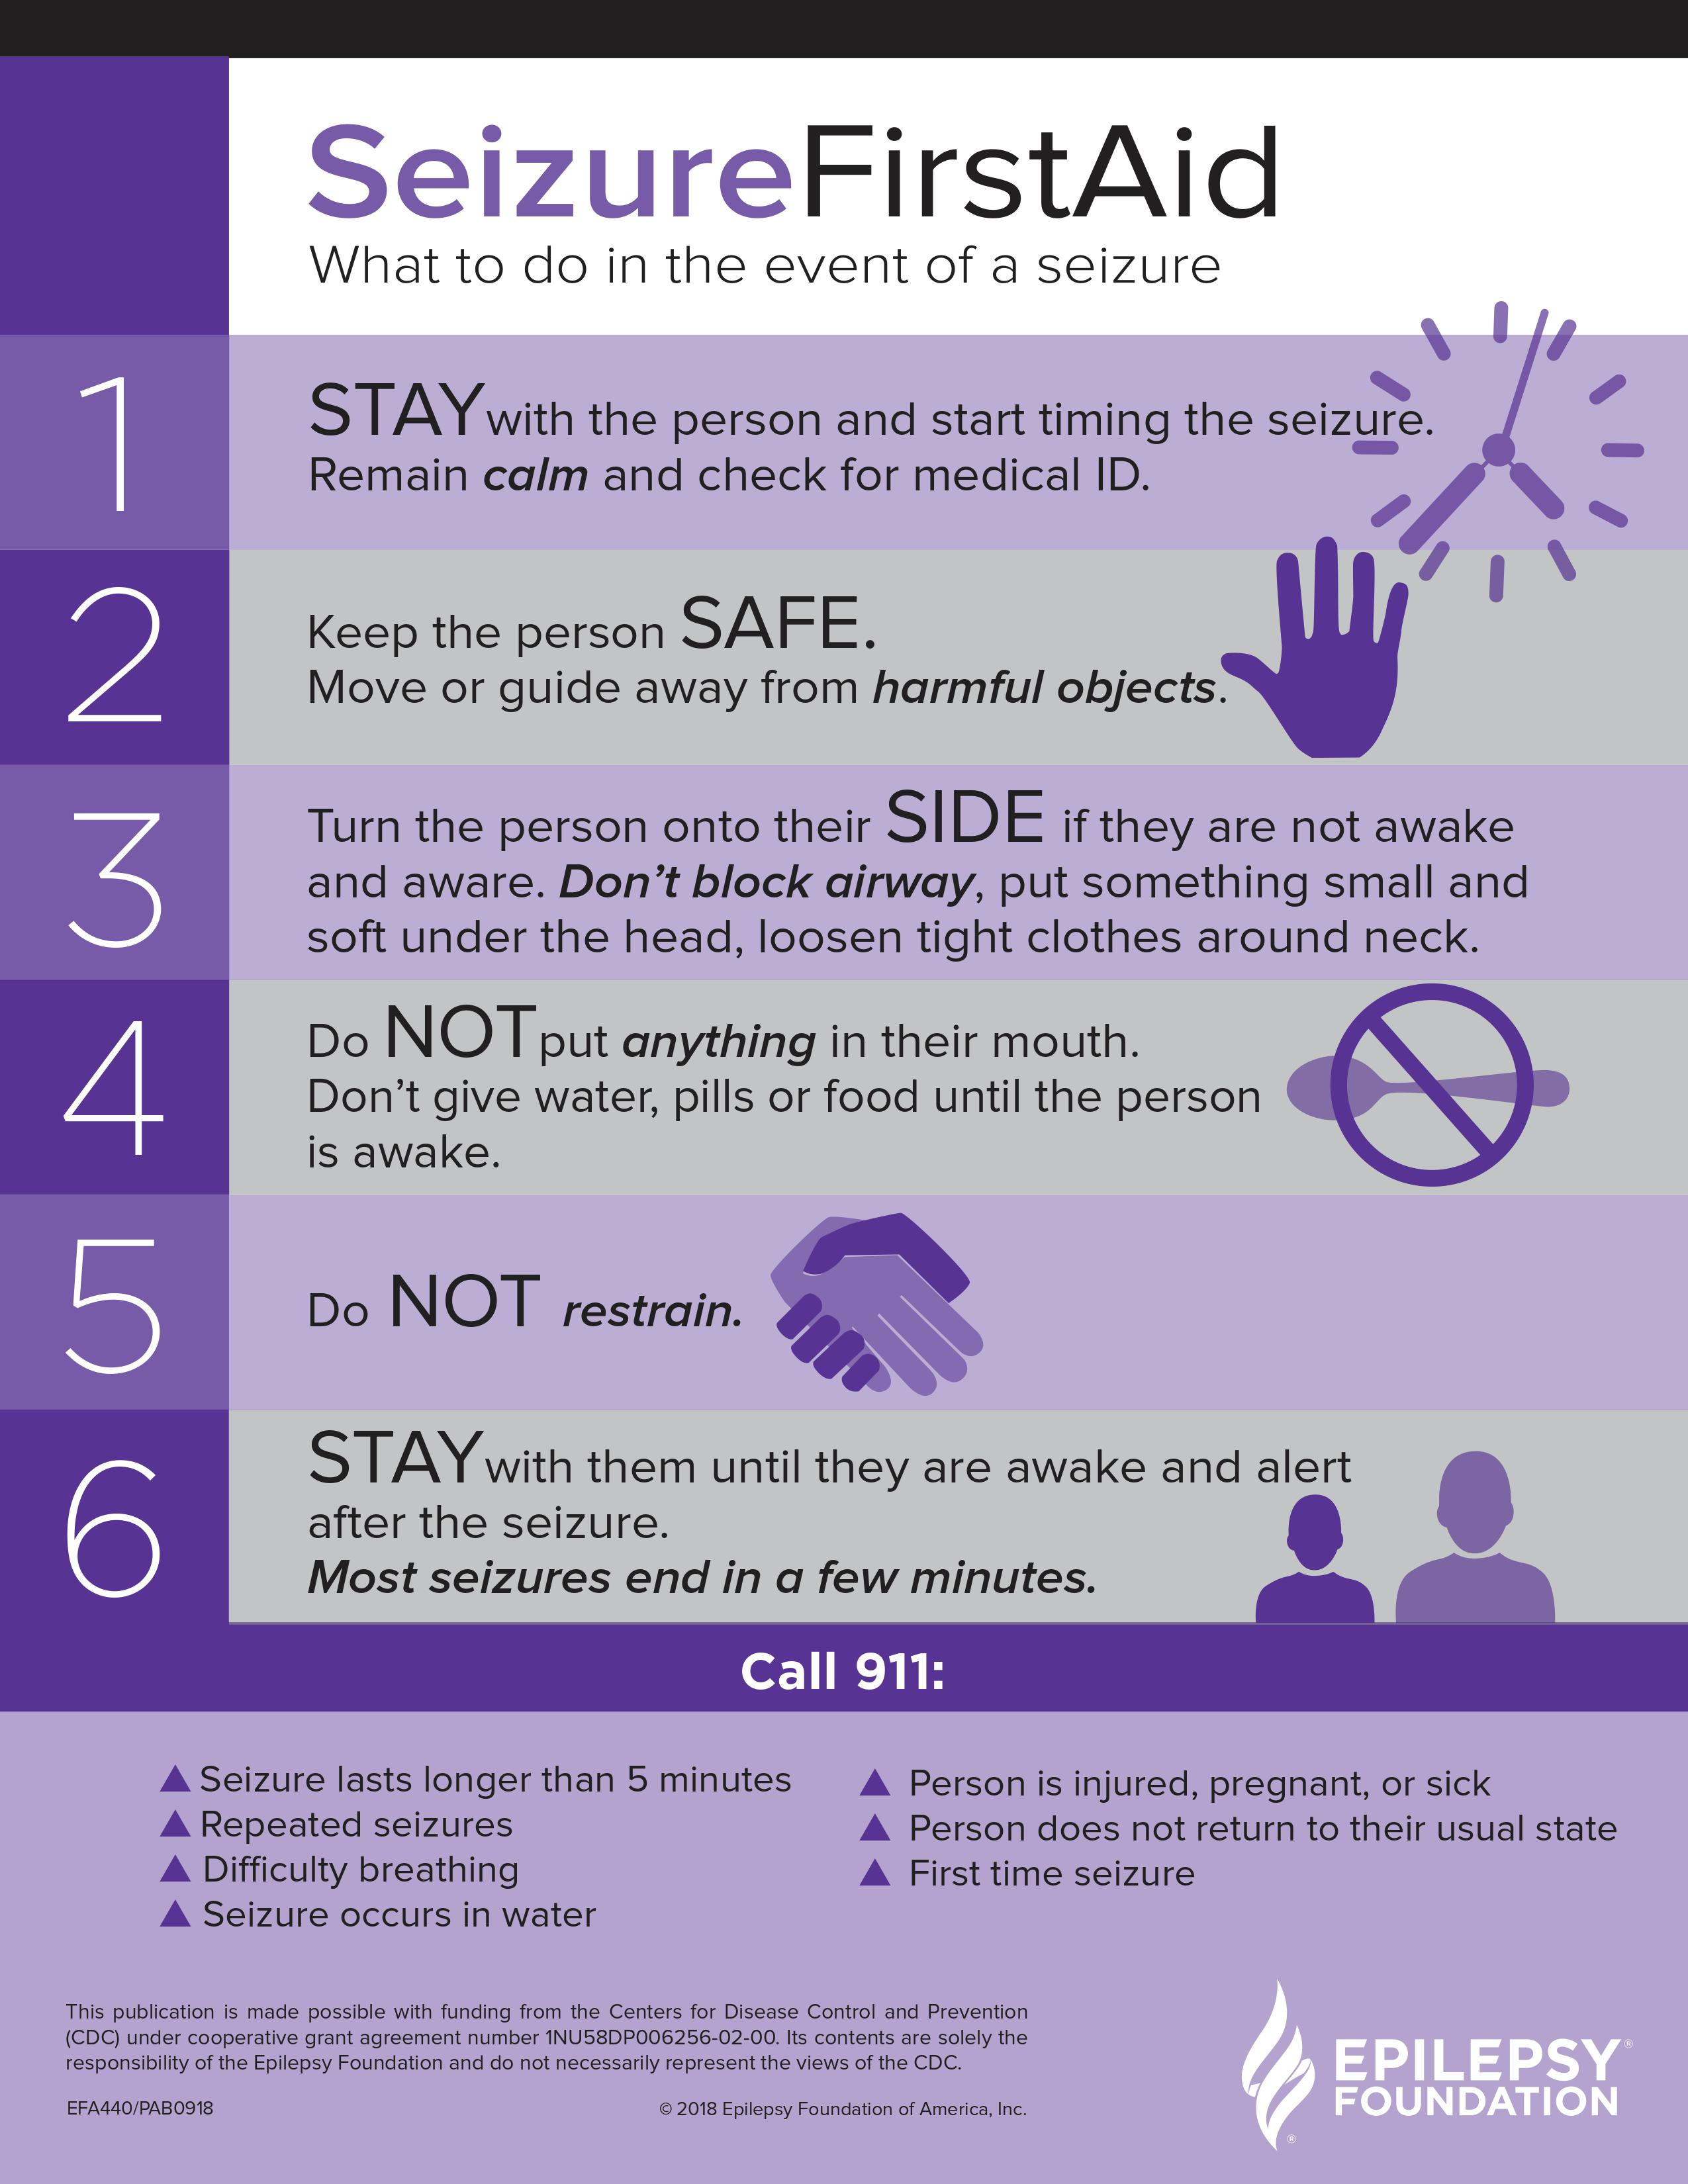 Facts about Epilepsy - Epic Long Island